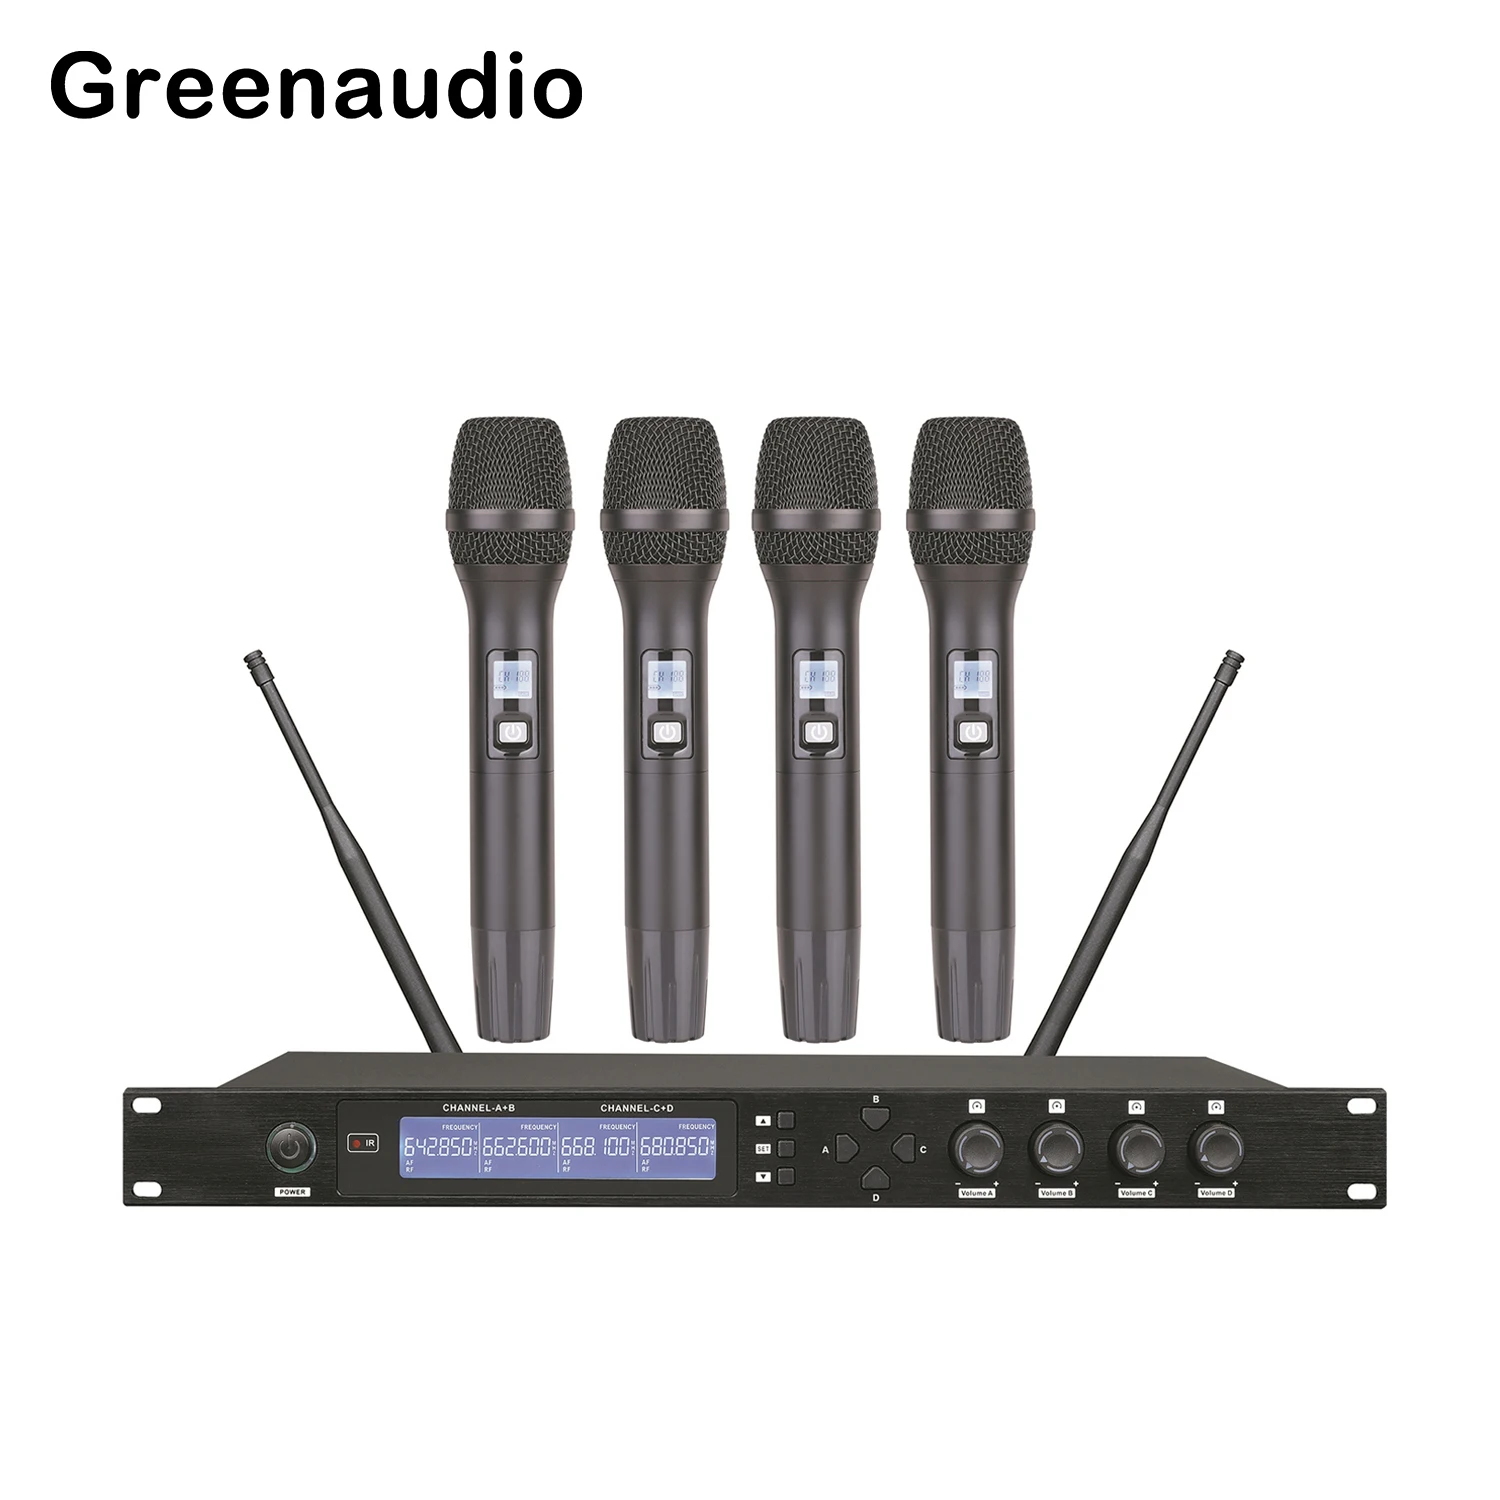 

GAW-U6604 100 frequency points per channel UHF wireless microphone system for KTV Outdoor performance and church